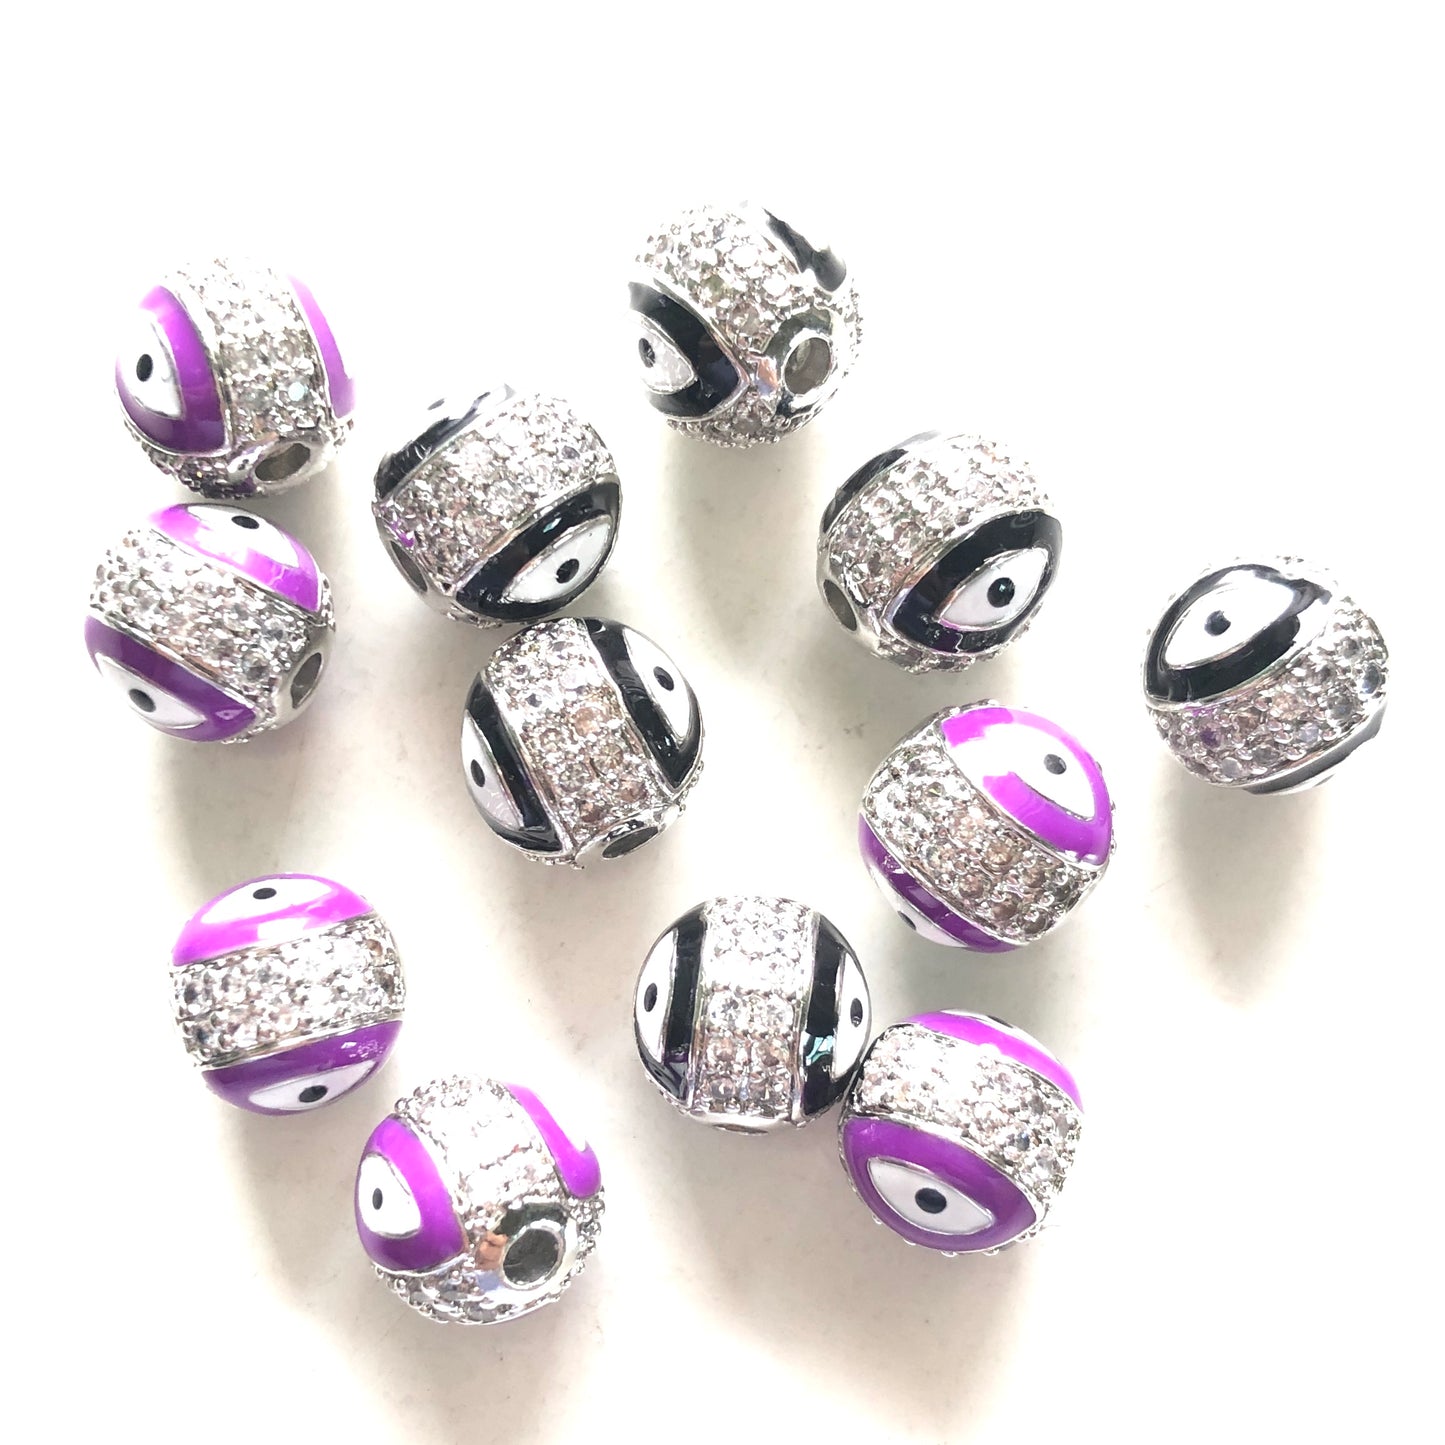 10pcs/lot 10mm CZ Paved Silver Evil Eye Spacers Mix Colors CZ Paved Spacers 10mm Beads Ball Beads New Spacers Arrivals Charms Beads Beyond